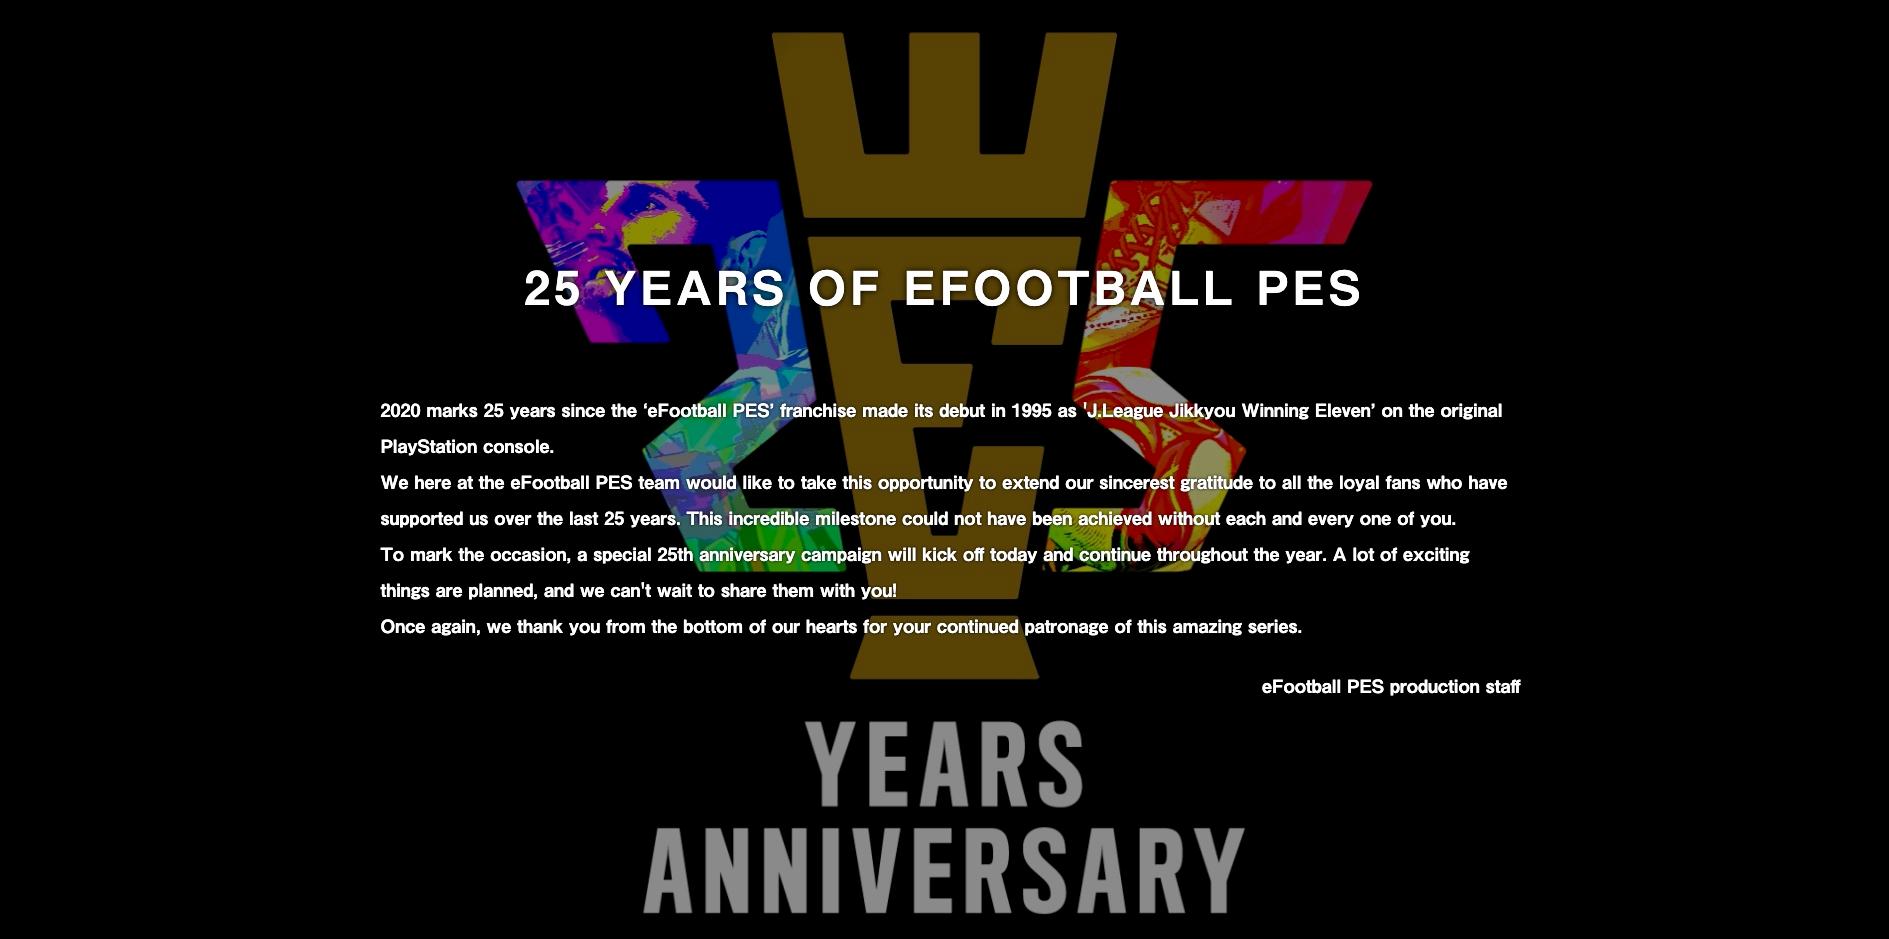 PES 25 year anniversary announcement